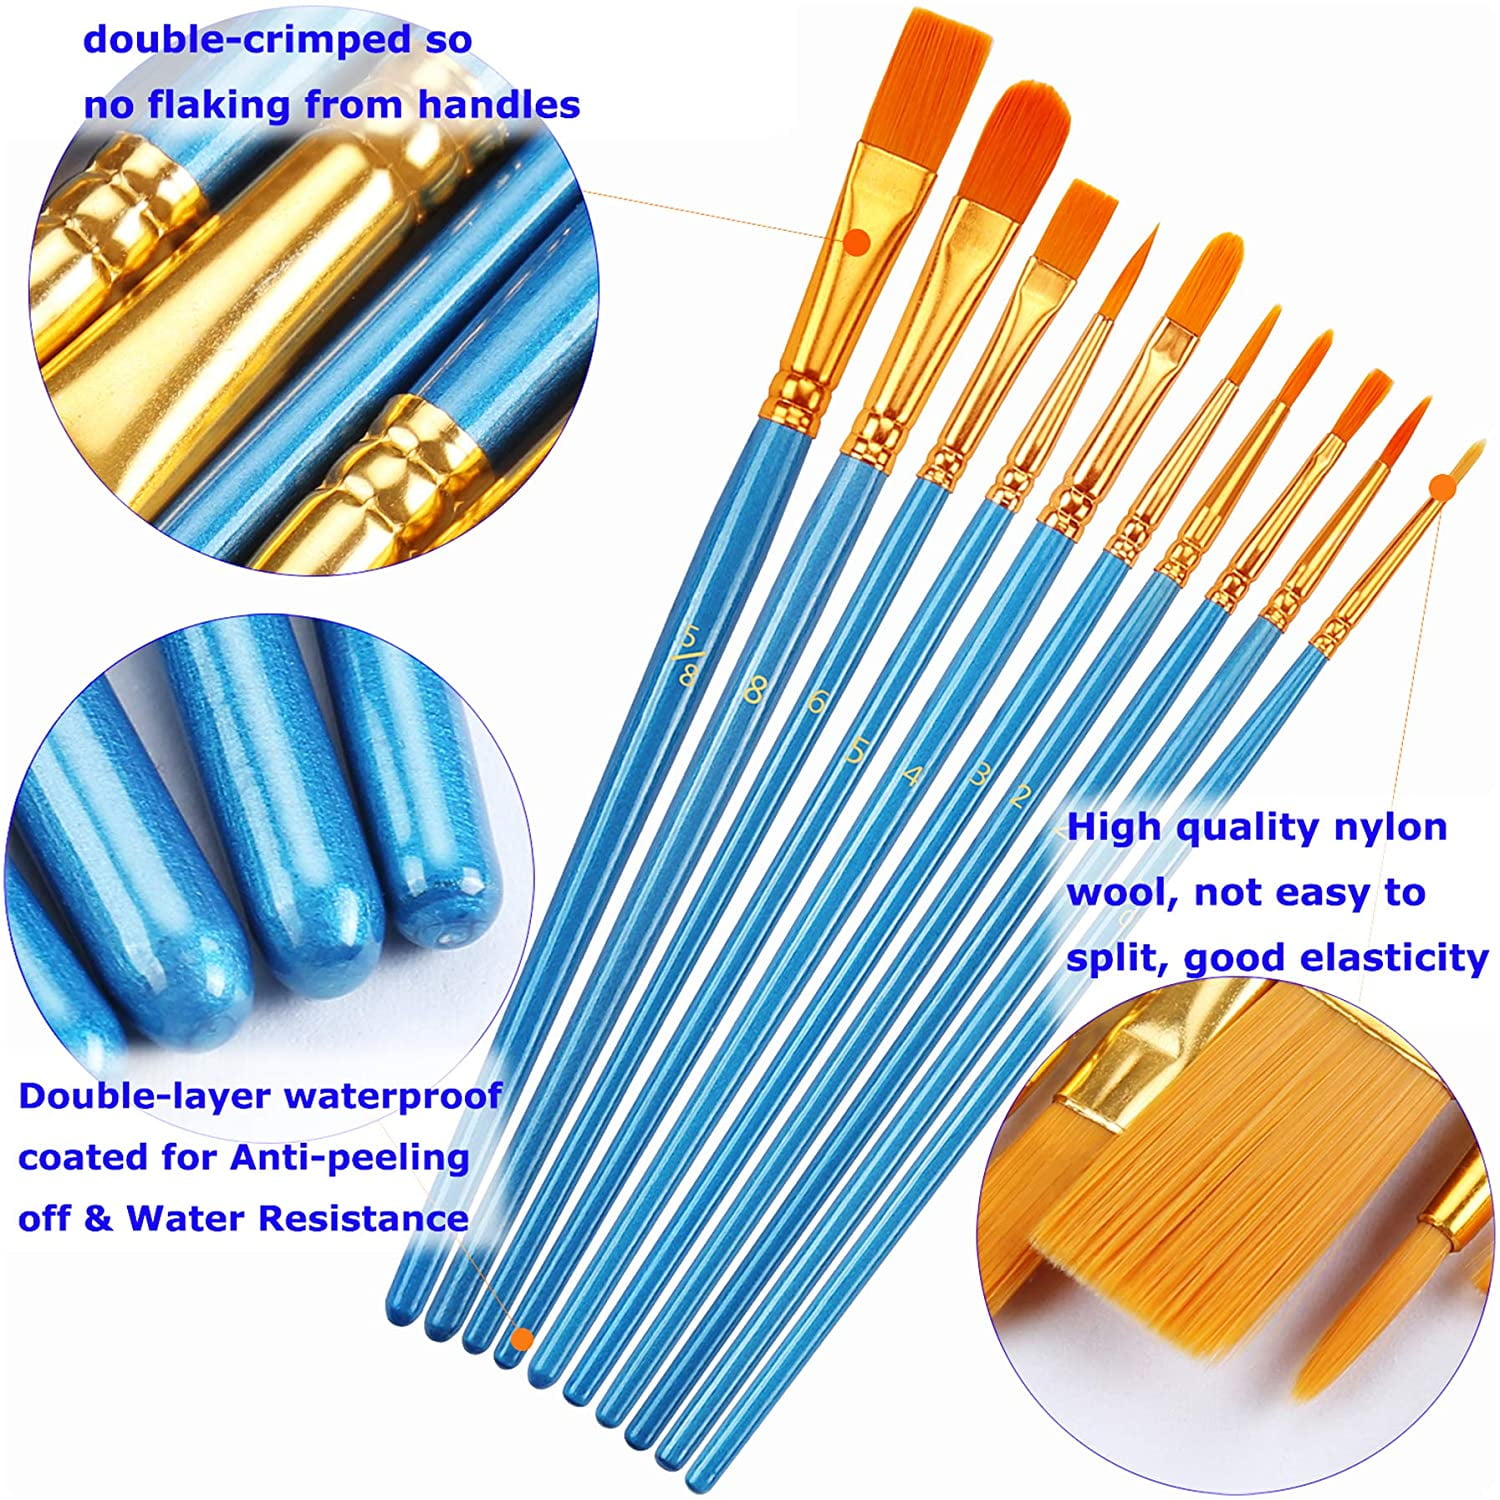 Paint Brushes Set, Nylon Artist Acrylic Paint Brushes For Acrylic Oil  Painting Watercolor Painting, Face Art And Rock Painting Supplies - Temu  Sweden